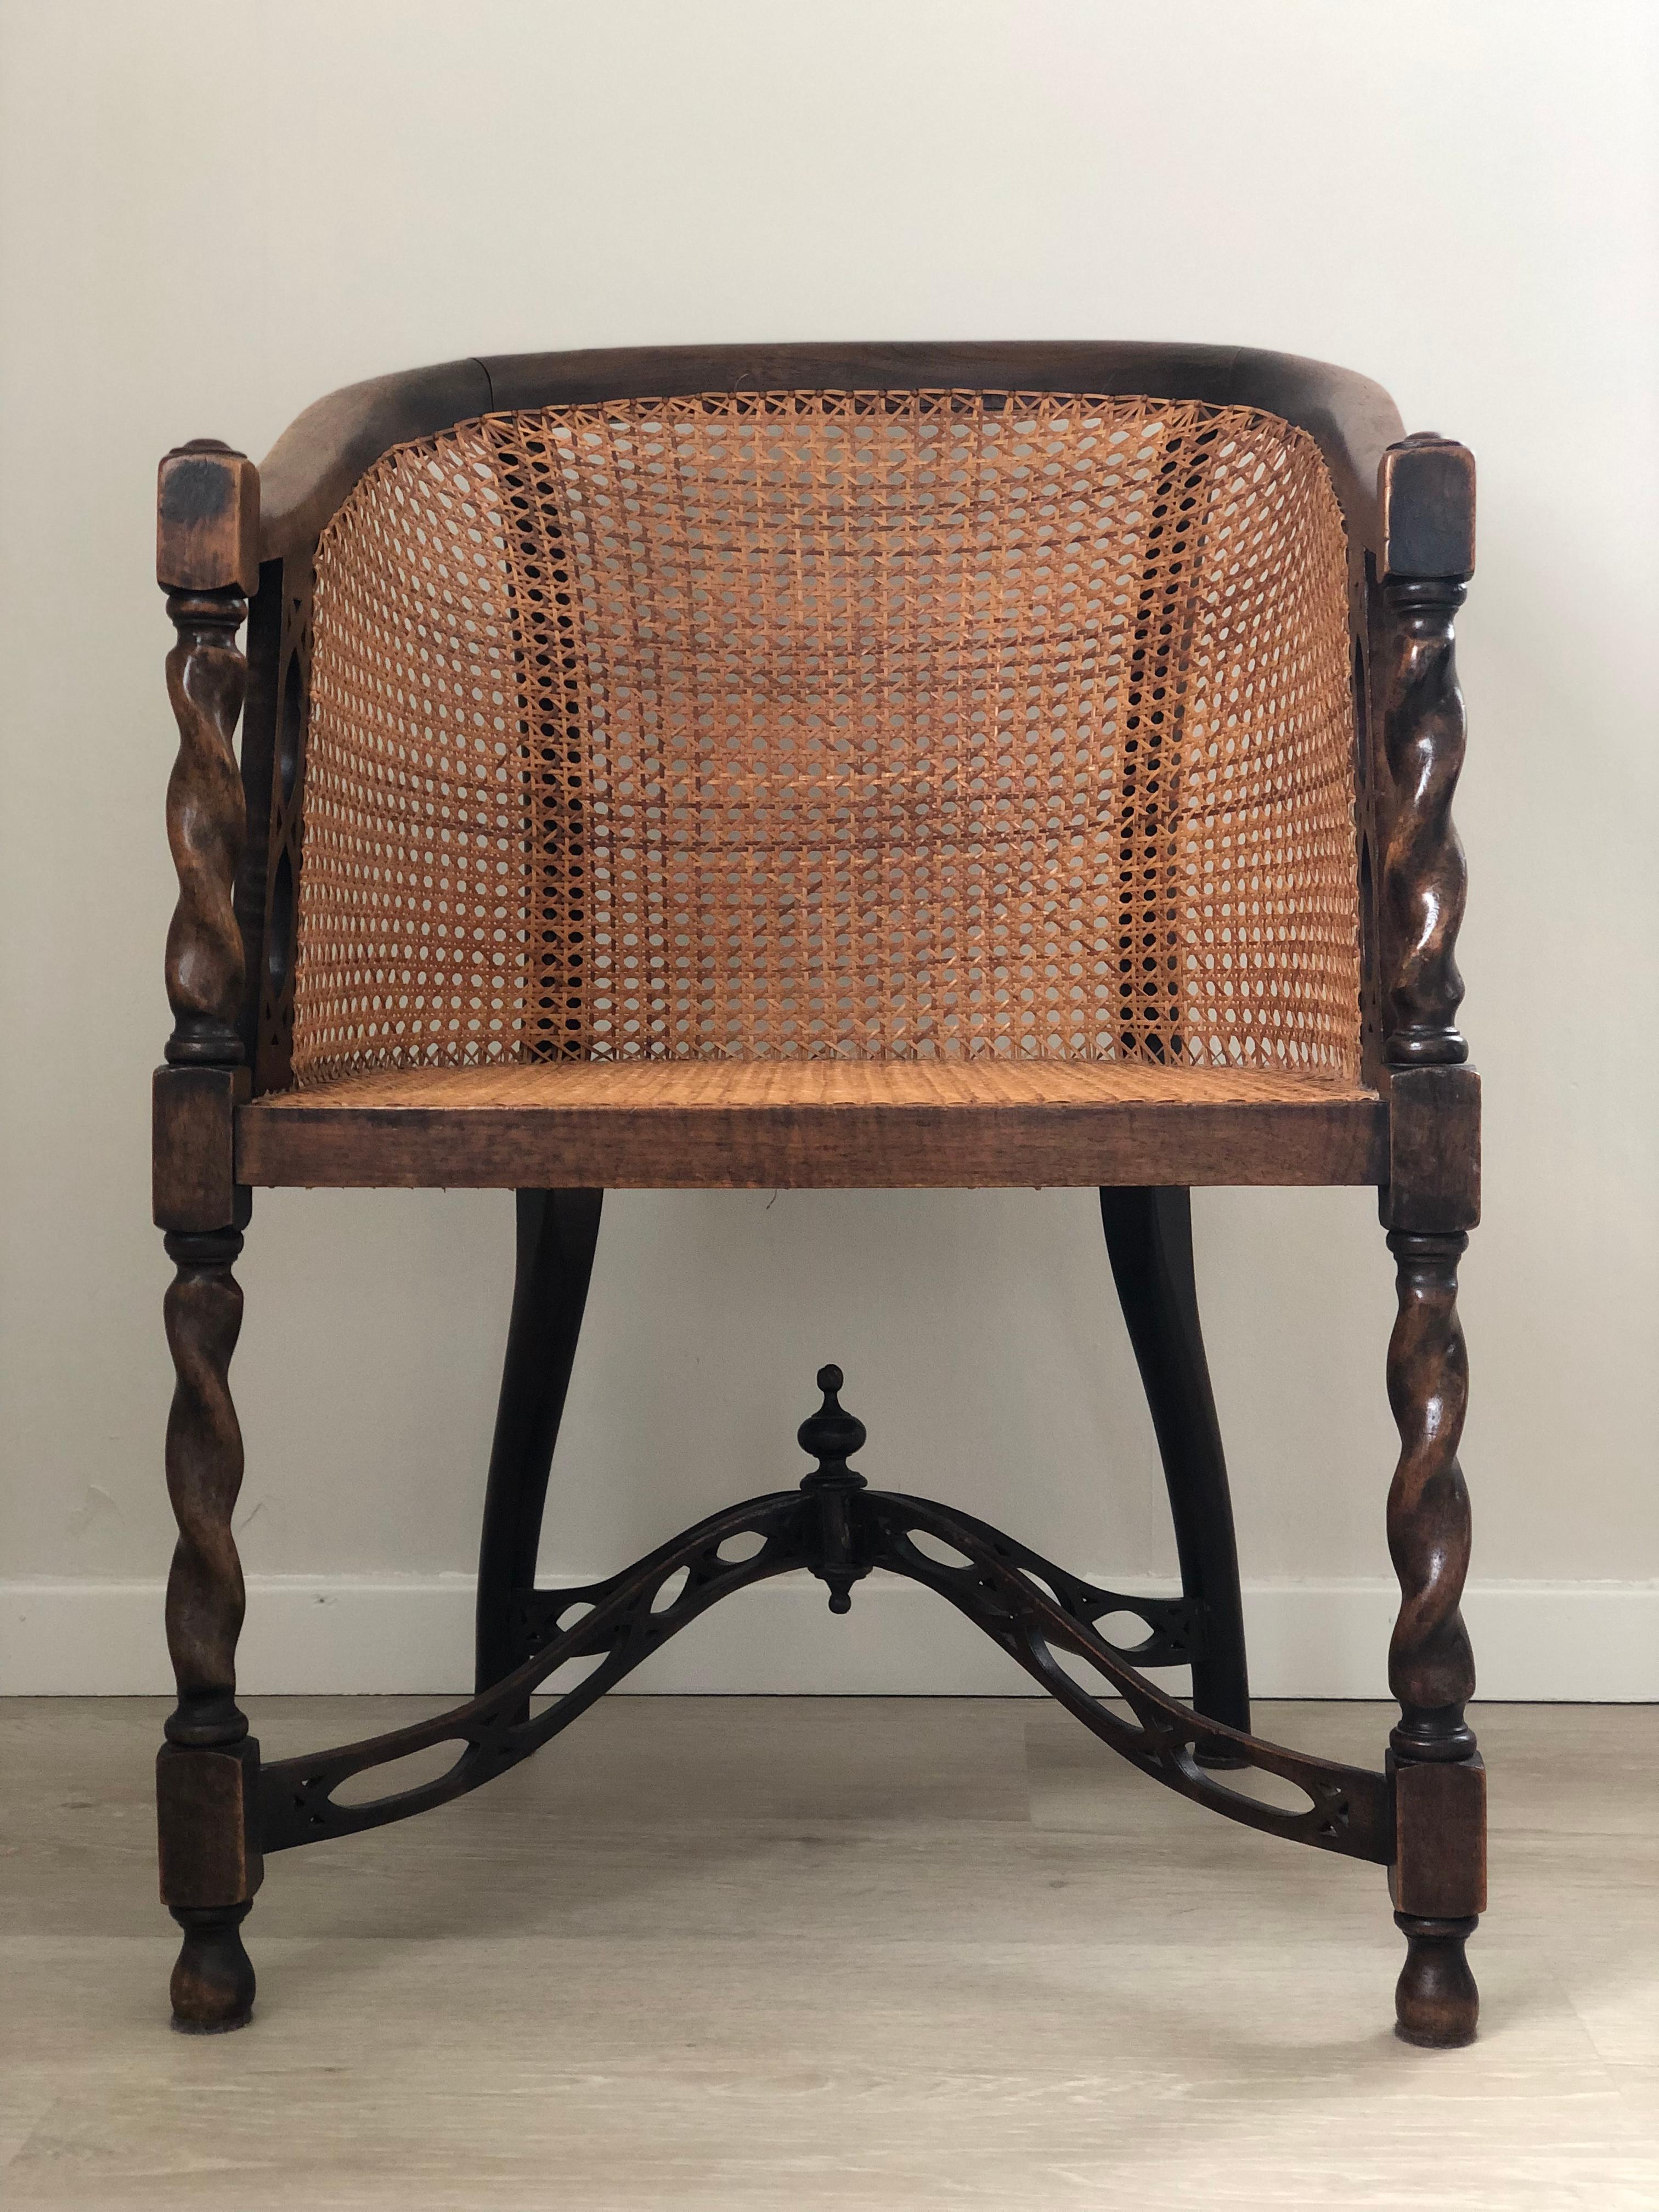 Edwardian Barley Twist Arm chair With Cane Early 20th Century In Good Condition For Sale In Bjuråker, SE